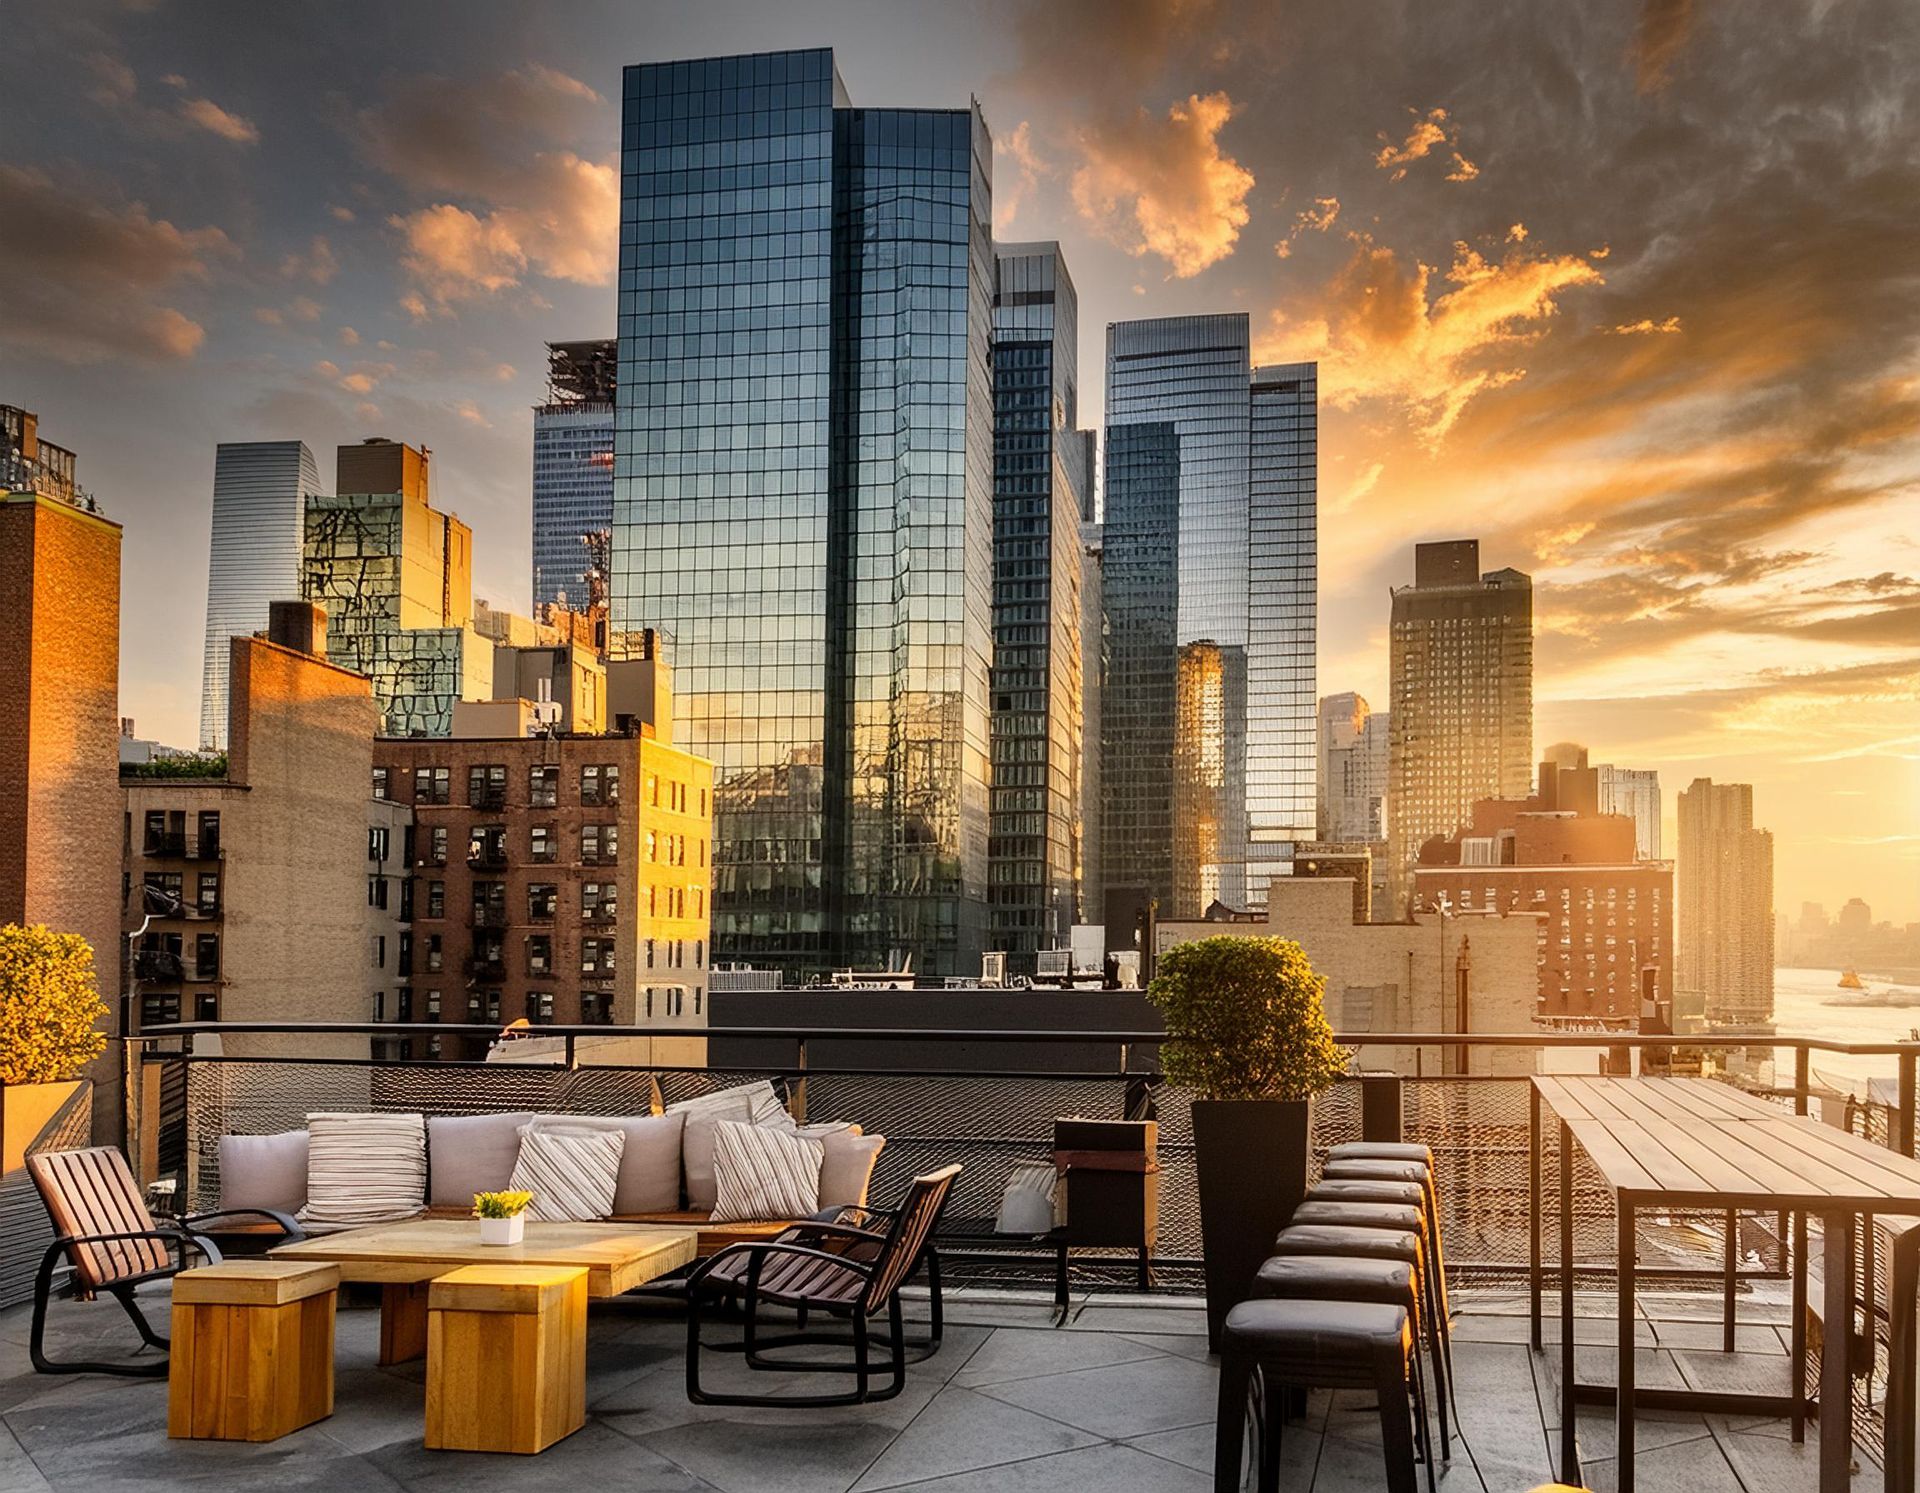 A rooftop patio with a view of the city skyline at sunset